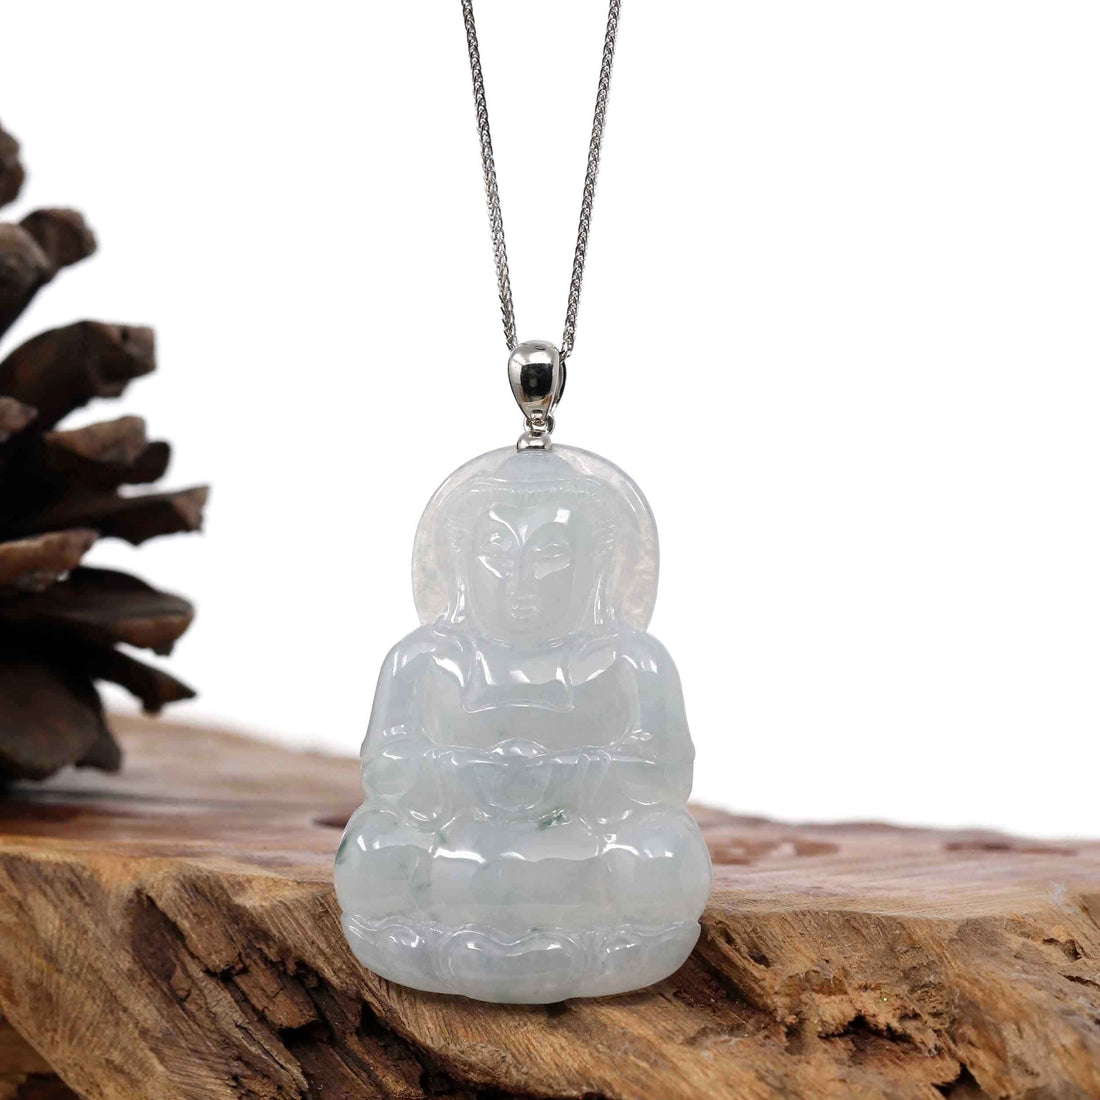 Baikalla Jewelry Jade Guanyin Pendant Necklace Copy of Copy of Copy of "Goddess of Compassion" Genuine Burmese Ice Blue Jadeite Jade Guanyin Necklace With Good Luck Design Sterling Silver Bail